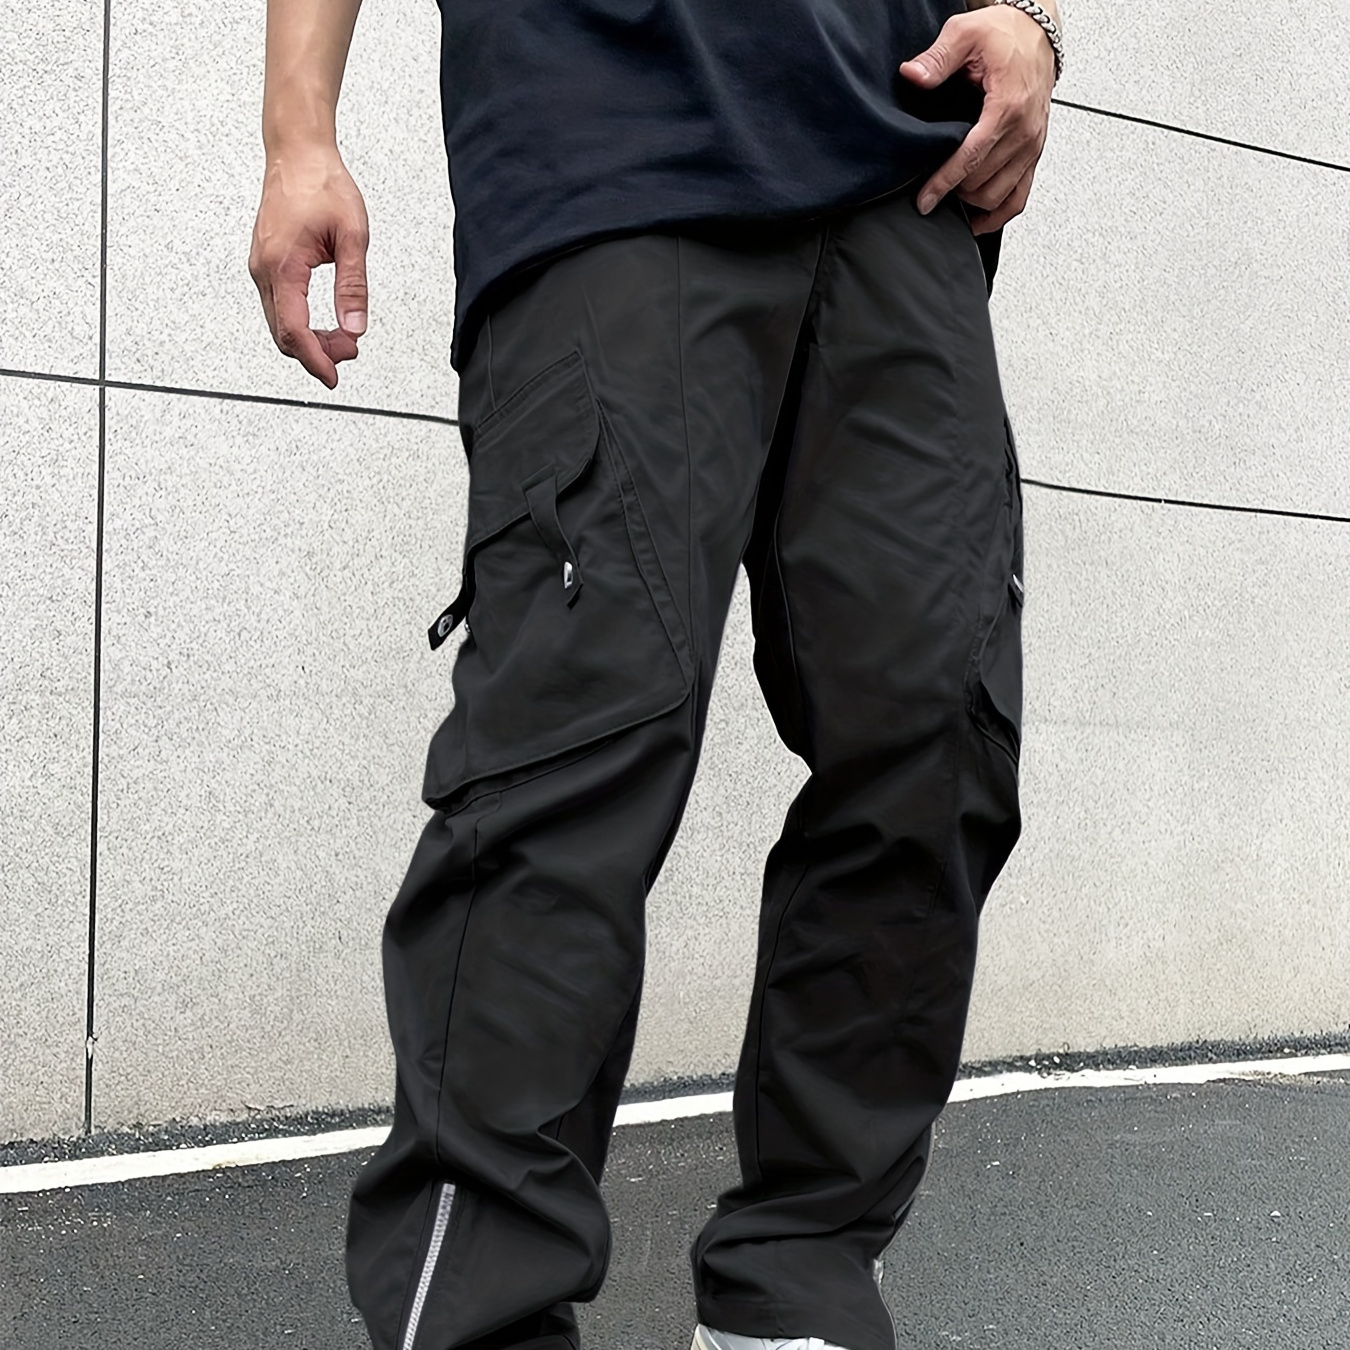 

Men's Cargo Pants Outdoor Hiking Multi-pocket Utility Long Trousers, Casual Style, For All Seasons